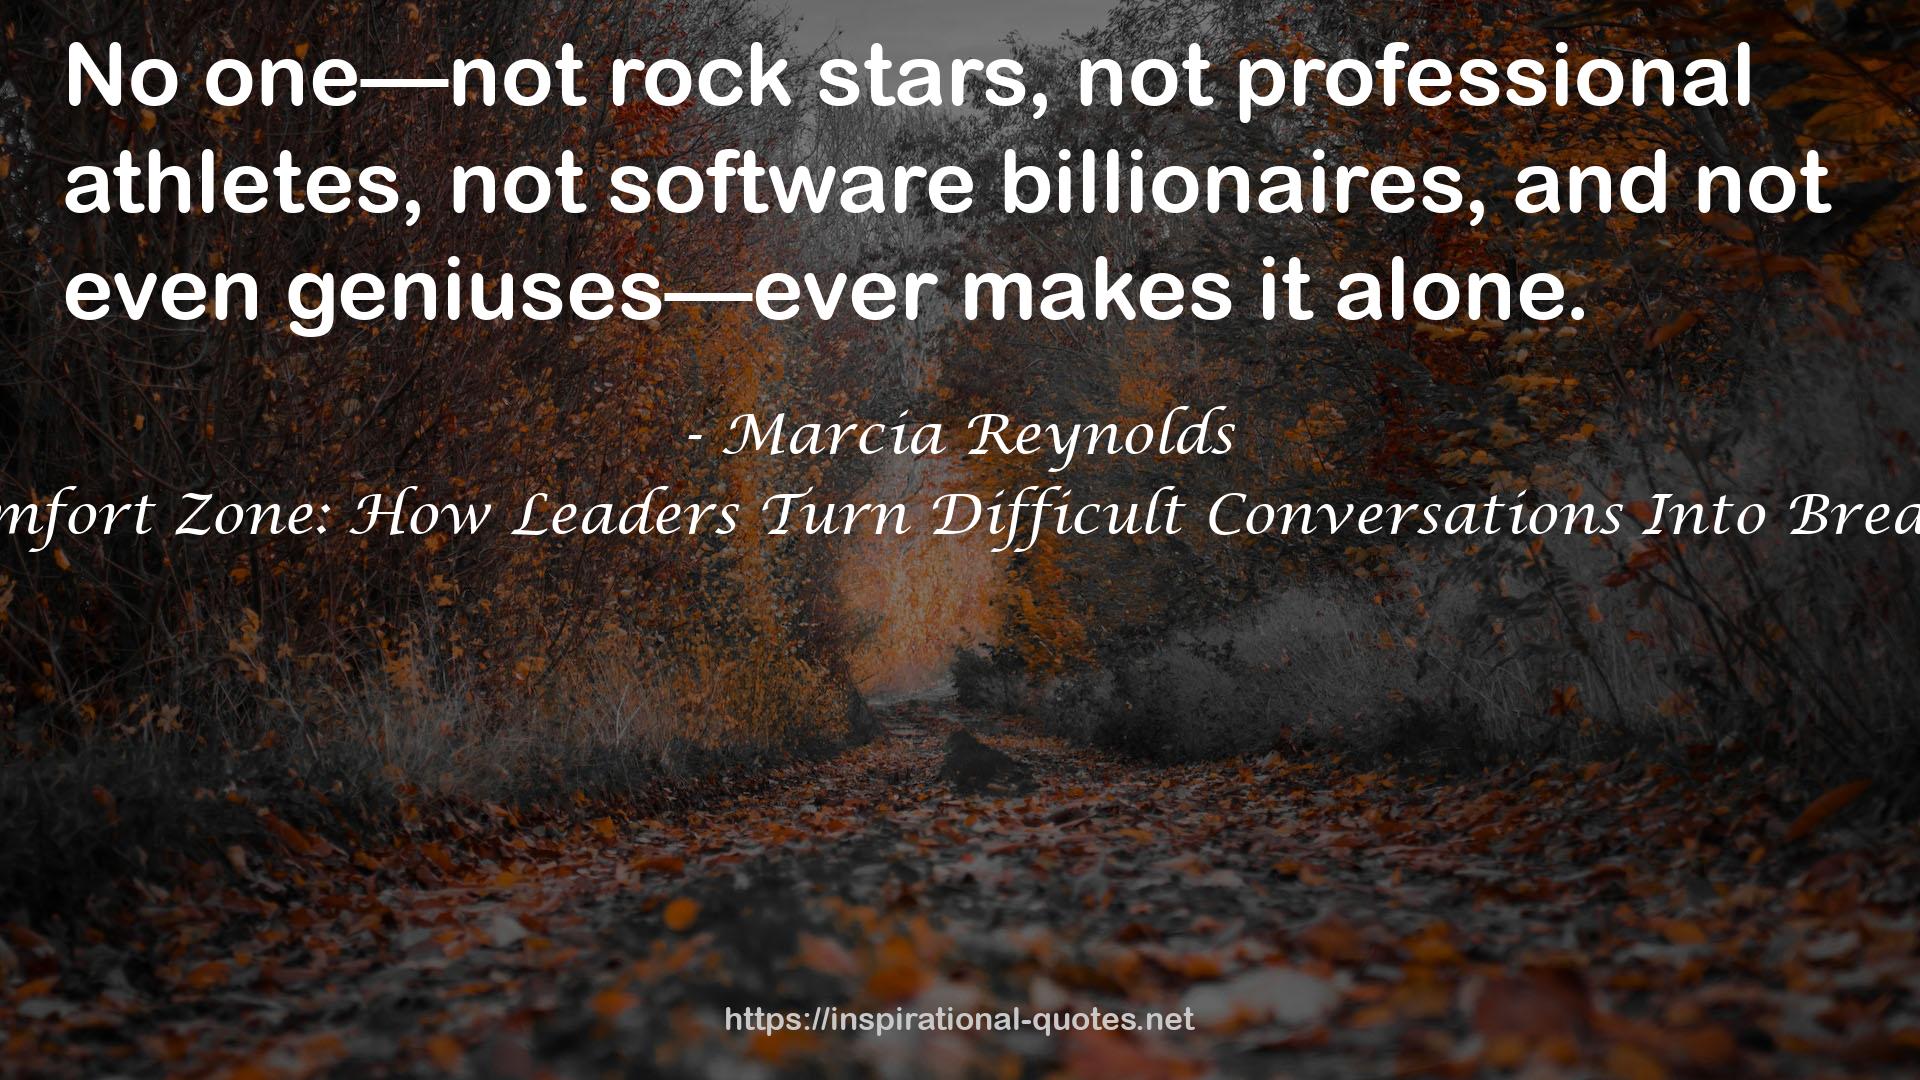 The Discomfort Zone: How Leaders Turn Difficult Conversations Into Breakthroughs QUOTES